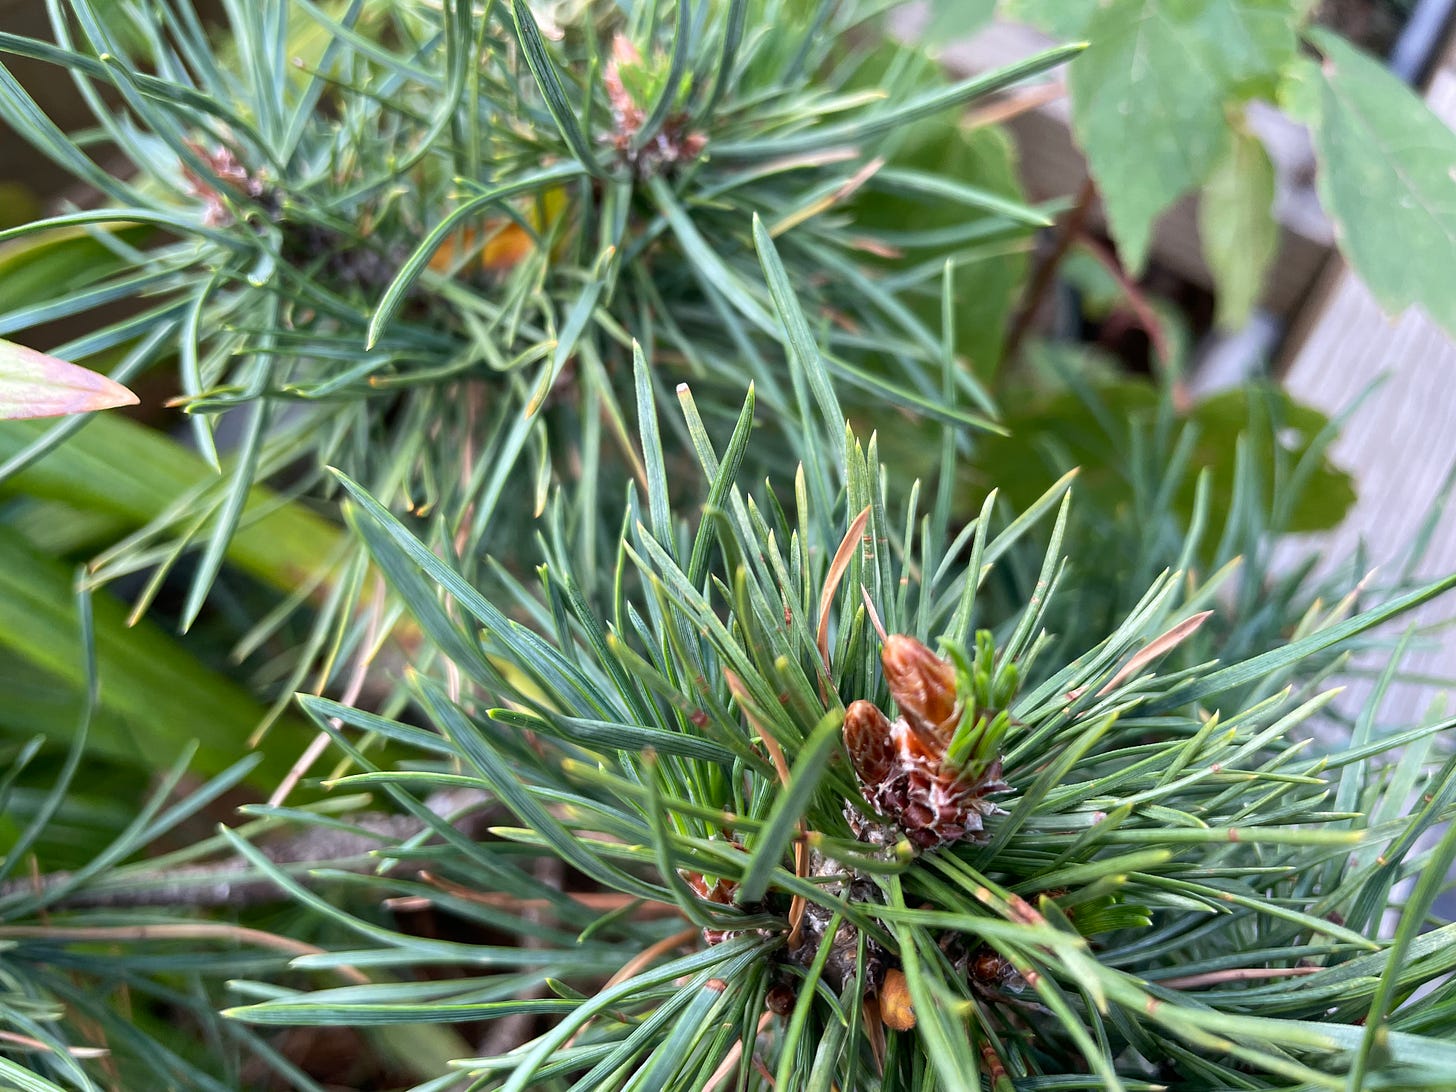 ID: Closeup photo of pine tree branch with brown buds at the tip. Needles are emerging from one of the buds.